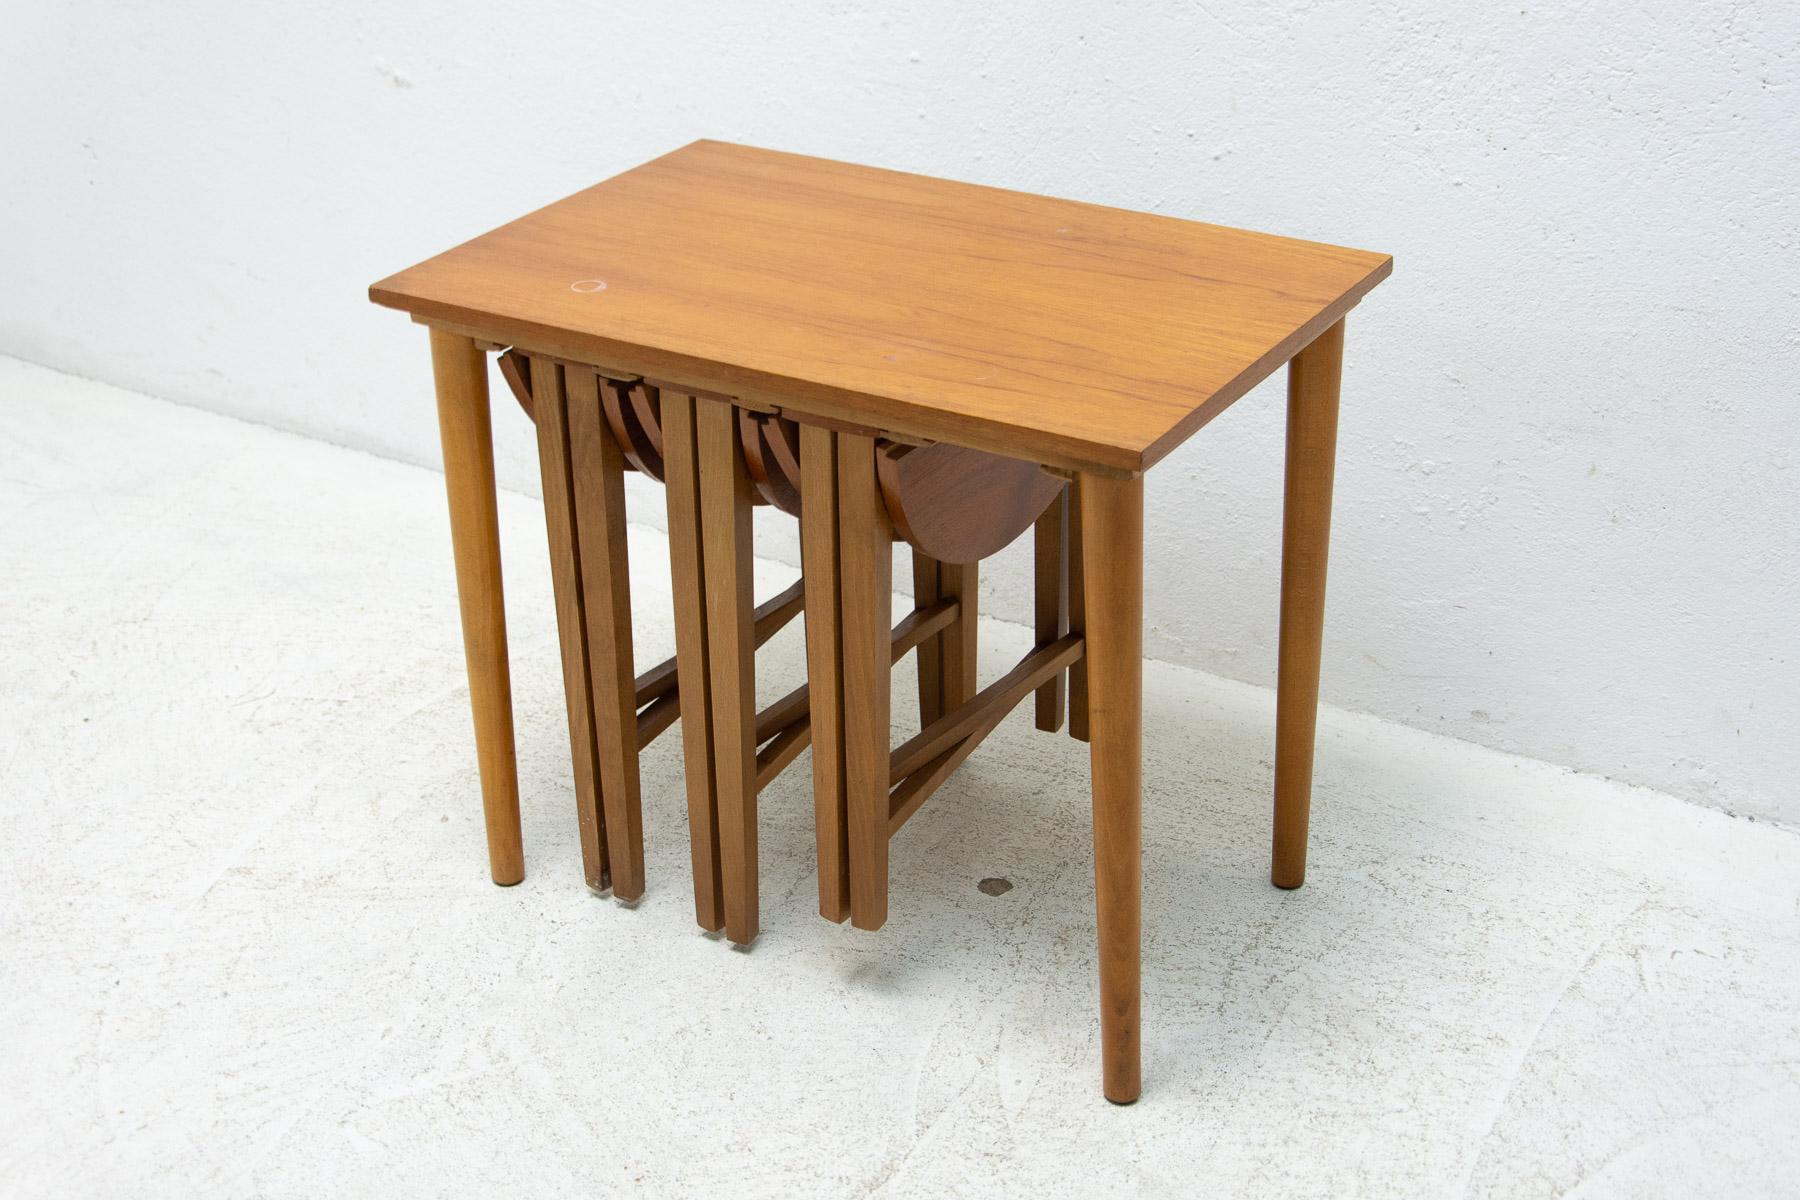 Set of Four Nesting Tables, Designed by Poul Hundevad, 1960's For Sale 5